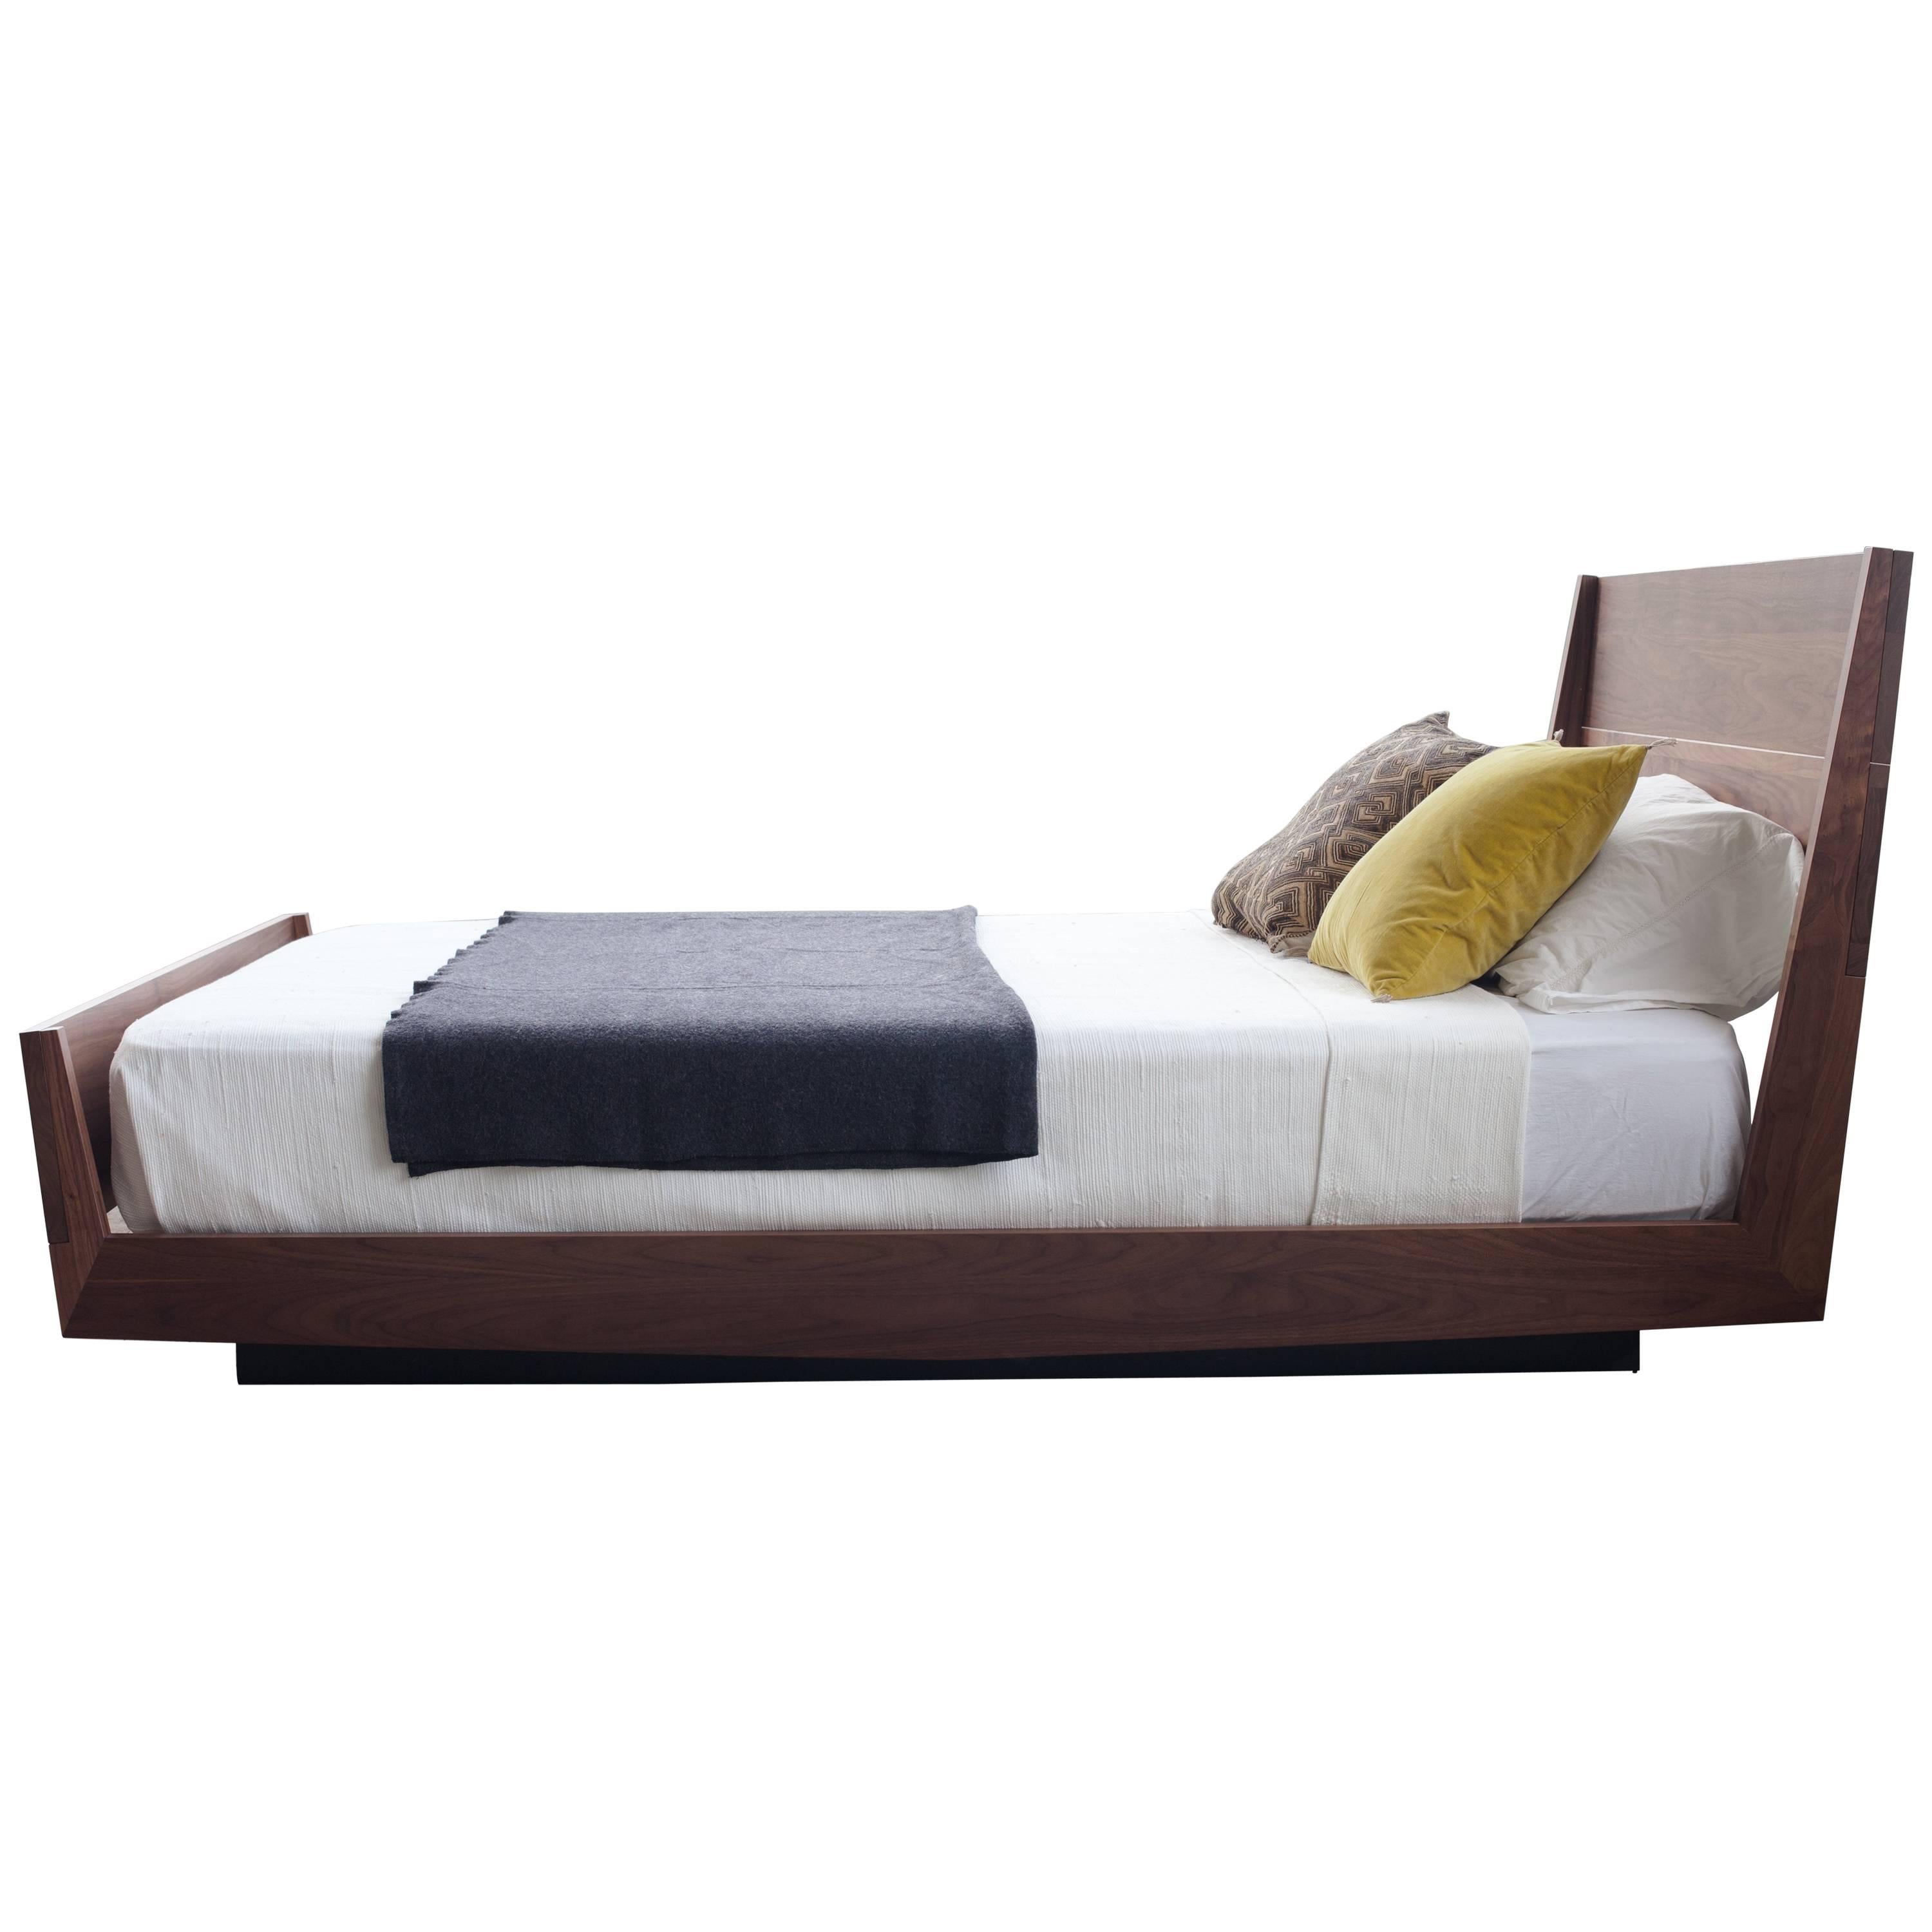 AB5 - Queen Size Contemporary Walnut Floating Platform Bed